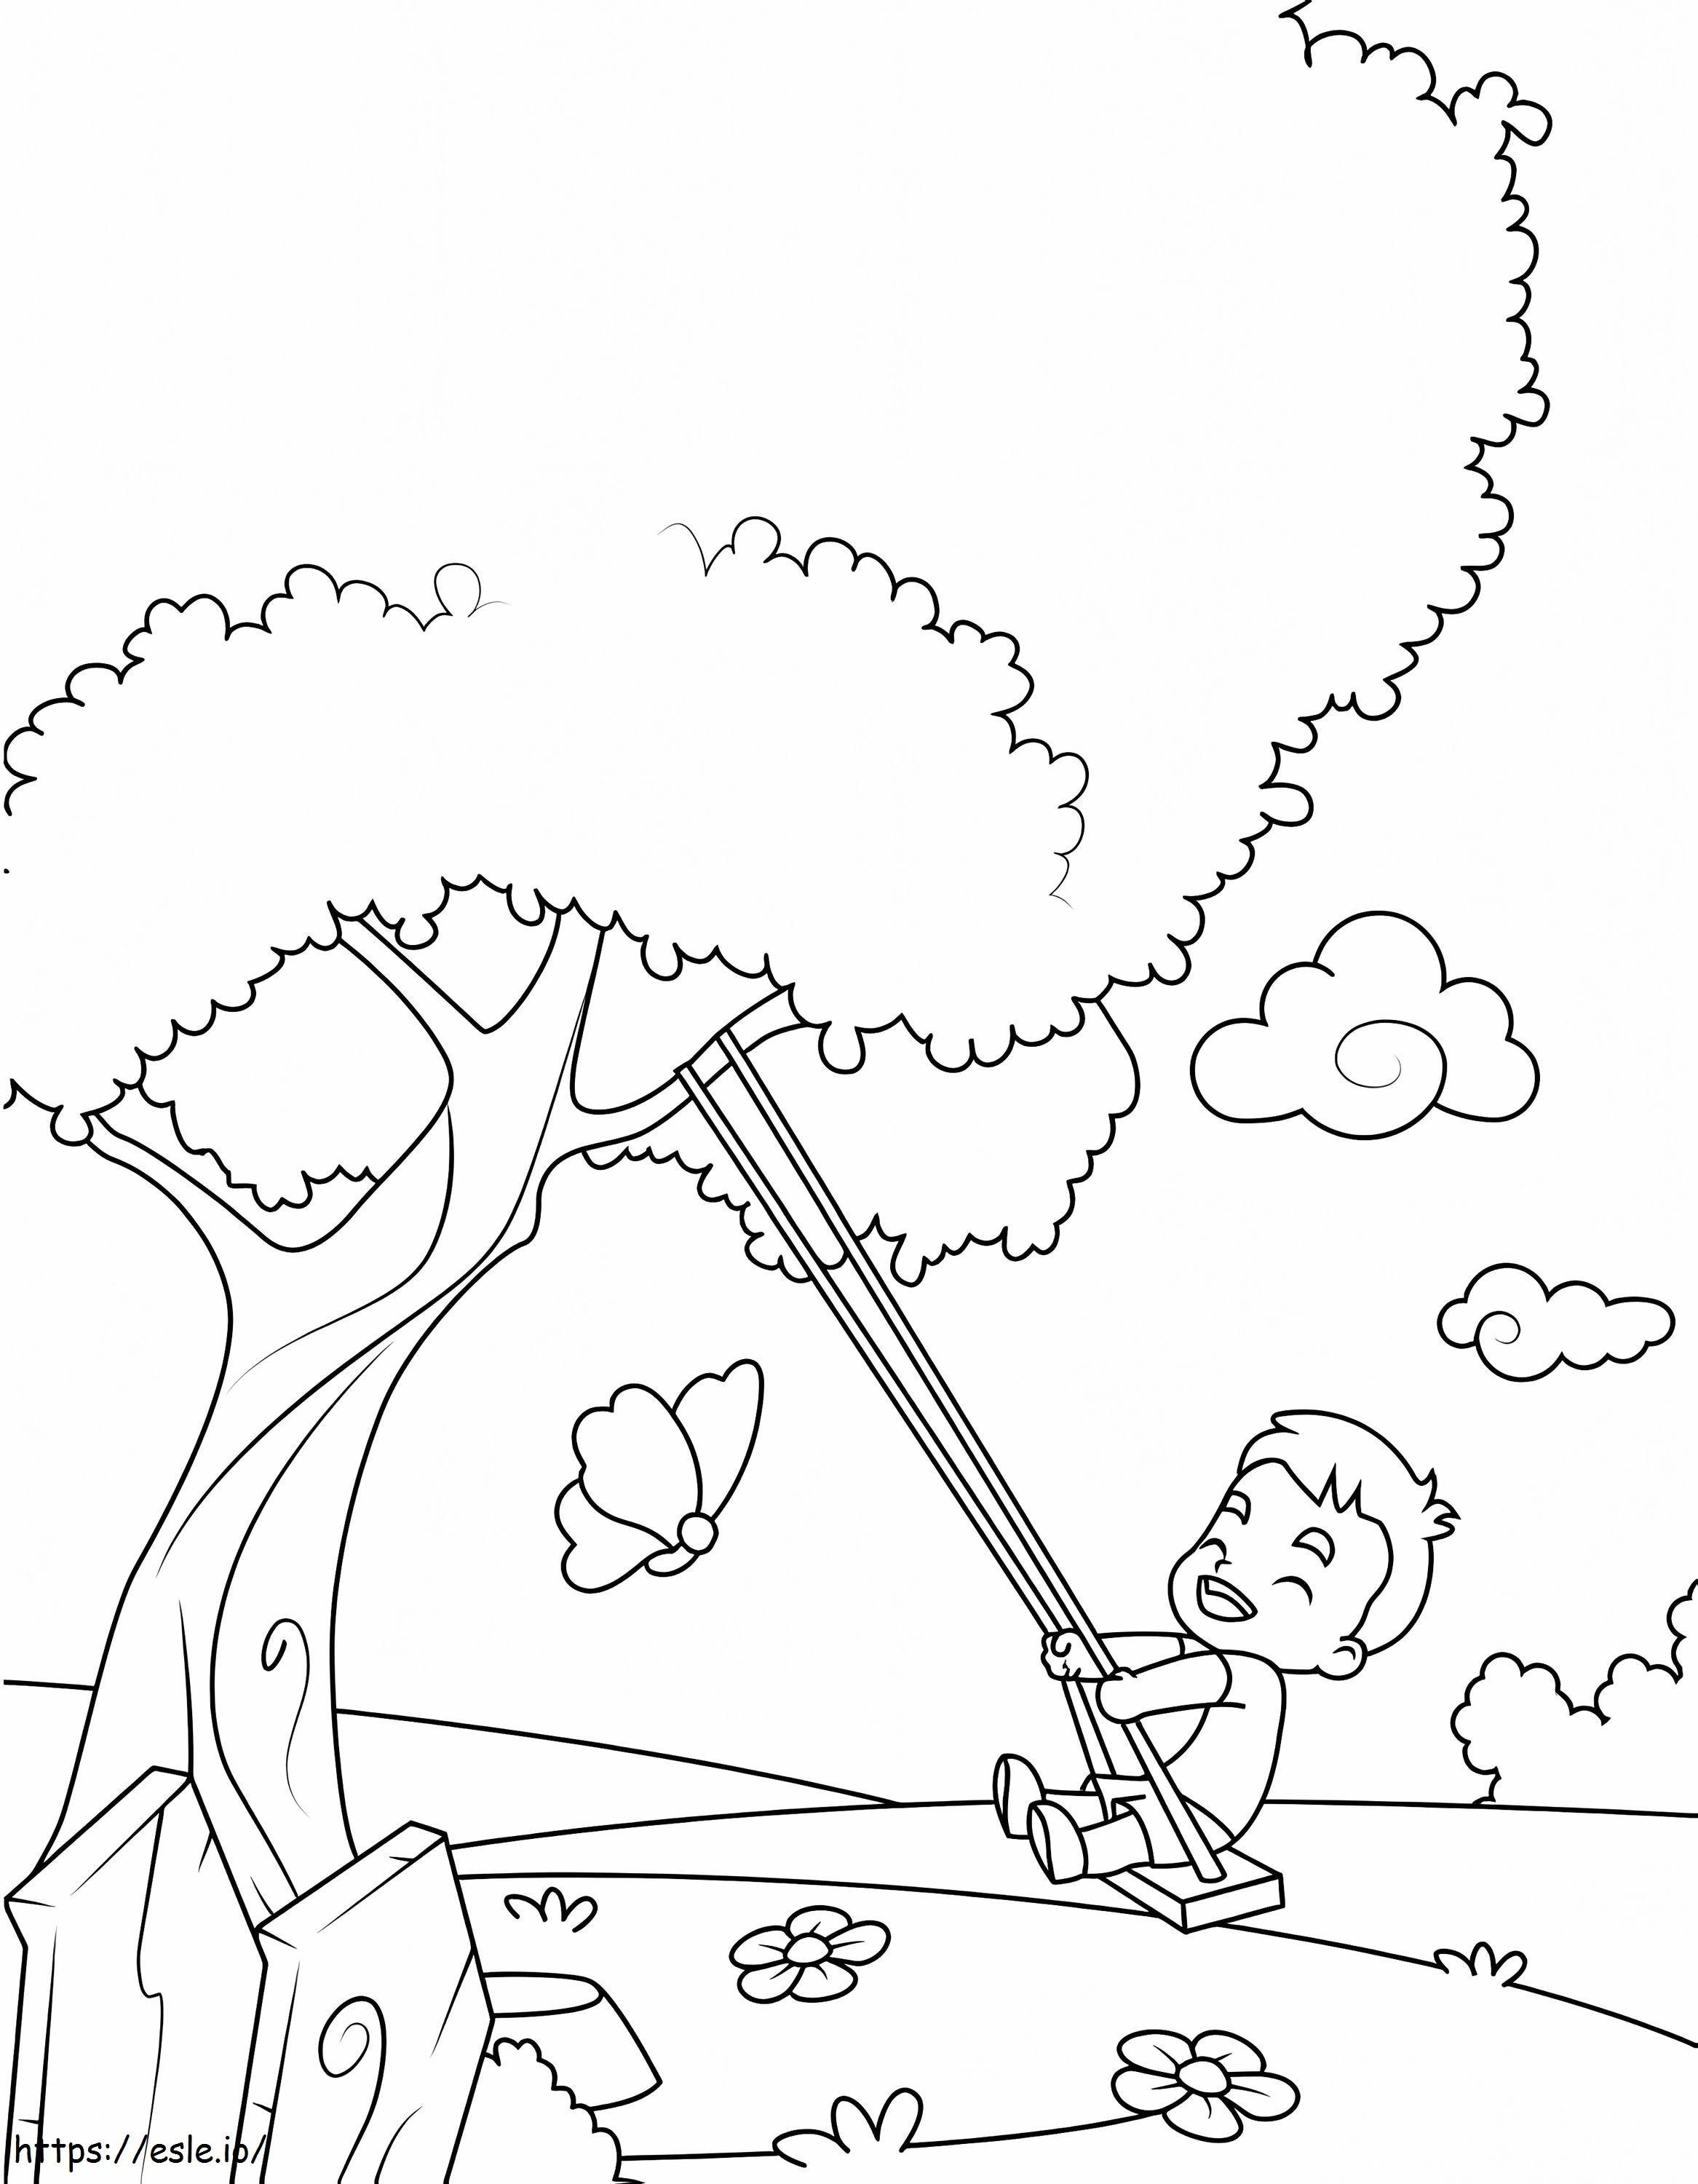 Child On Swing coloring page